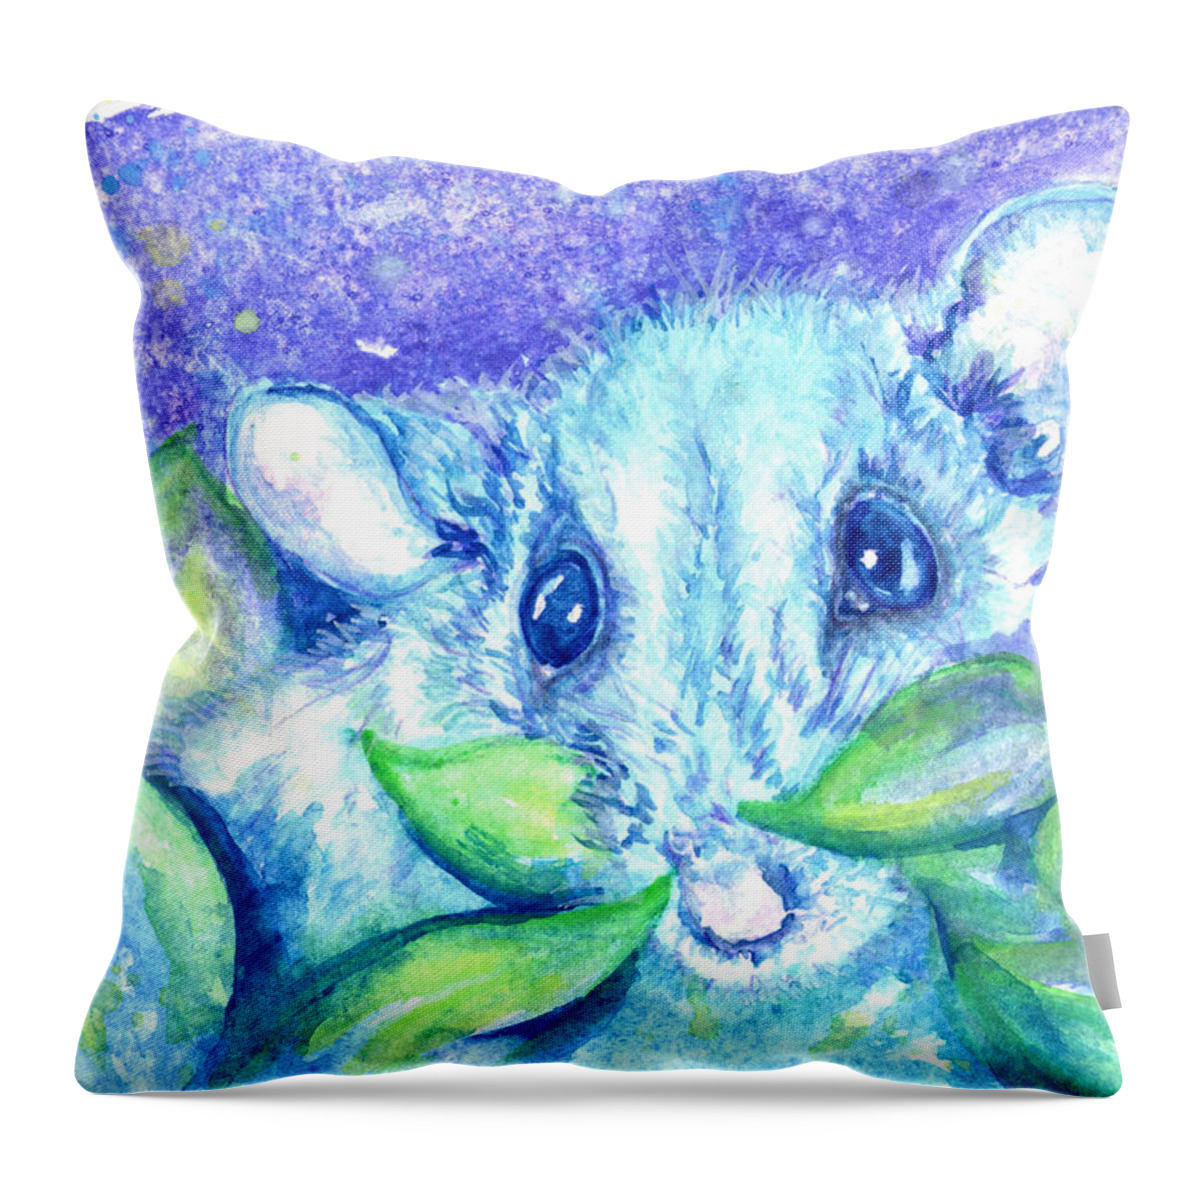 Florida Keys Throw Pillow featuring the painting Wendy by Ashley Kujan